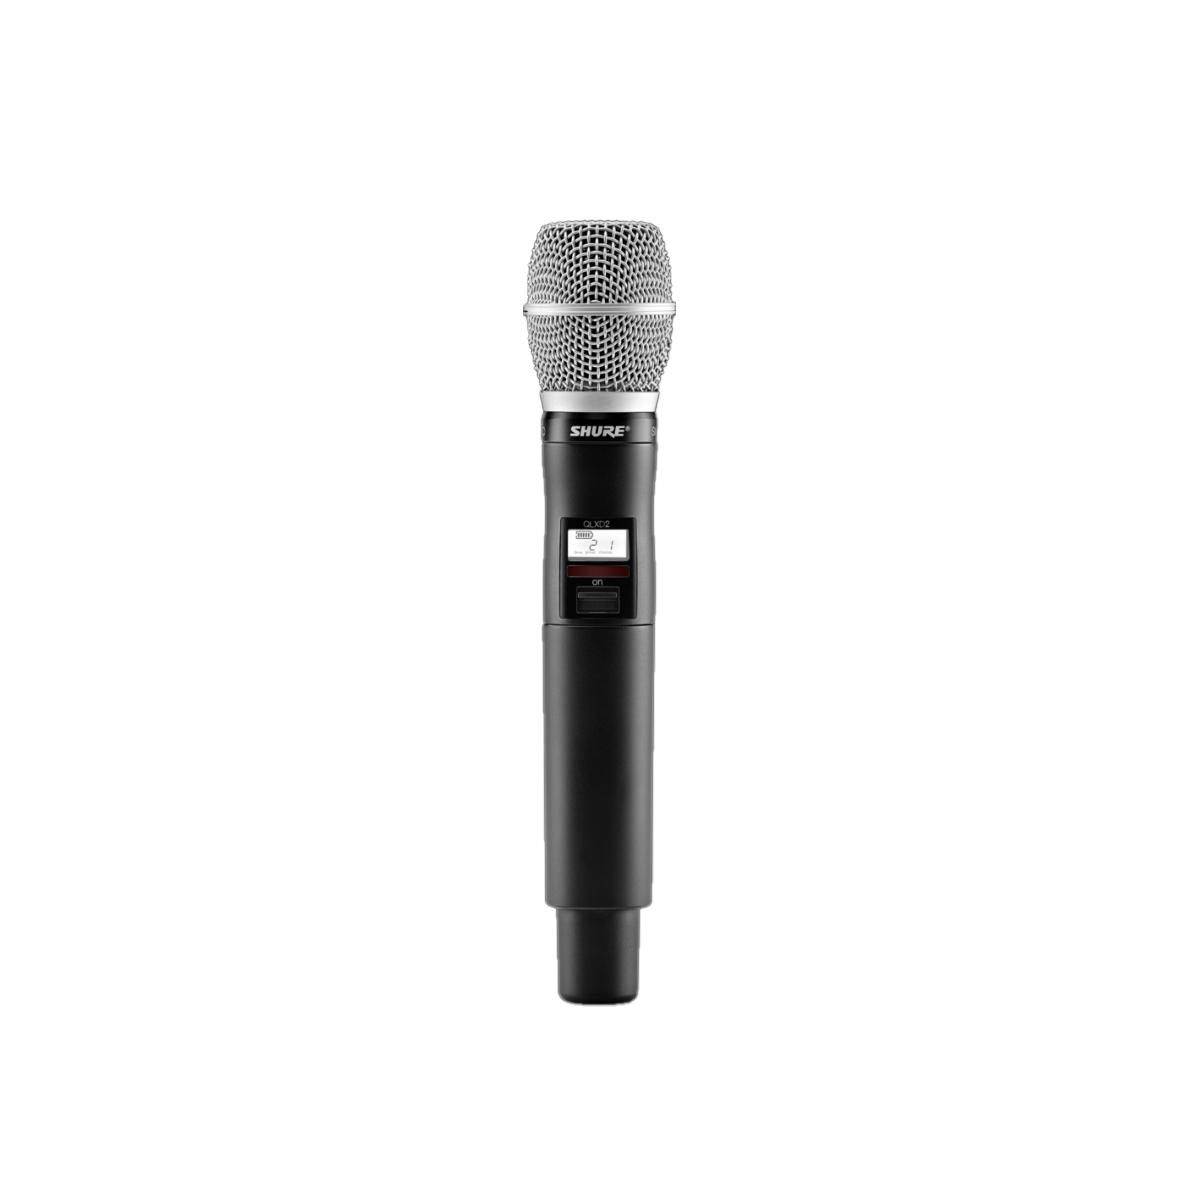 QLXD2/SM86=-X52 Handheld Transmitter with SM86 Microphone